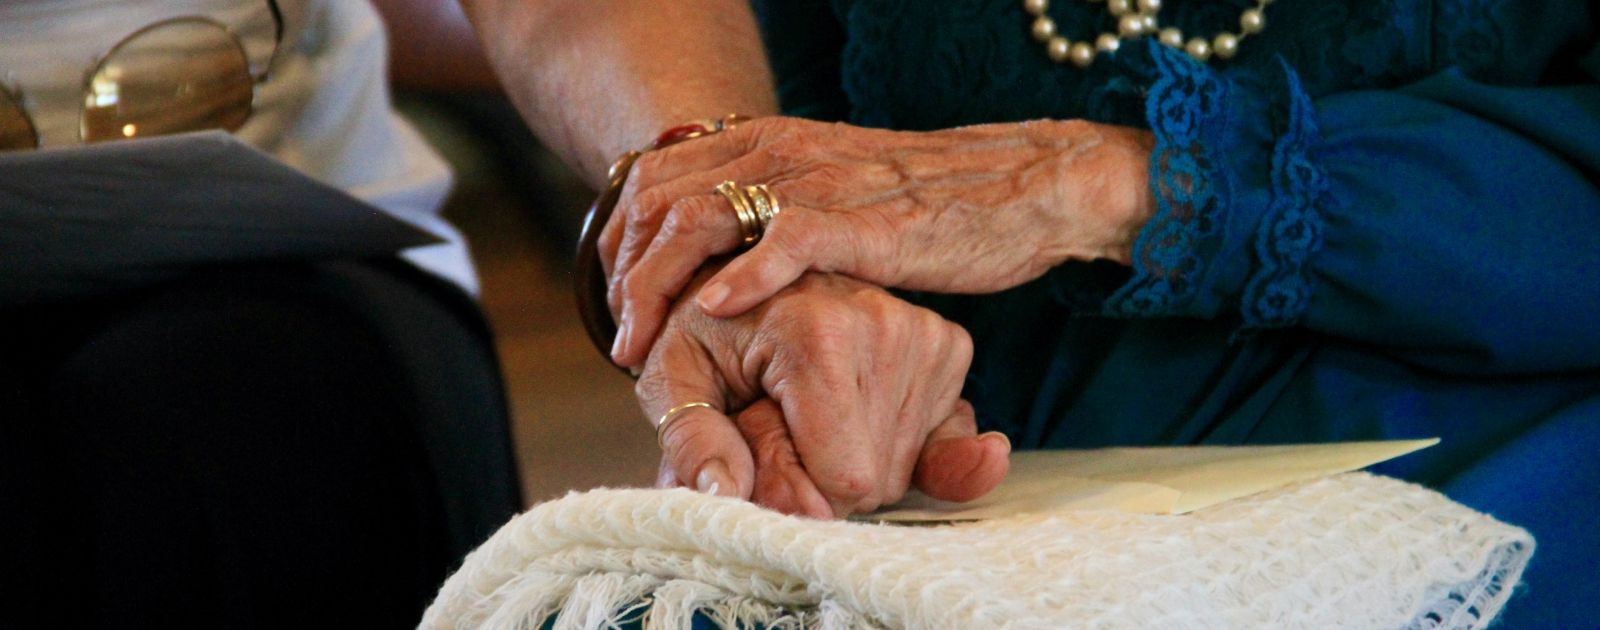 How to talk about later life care